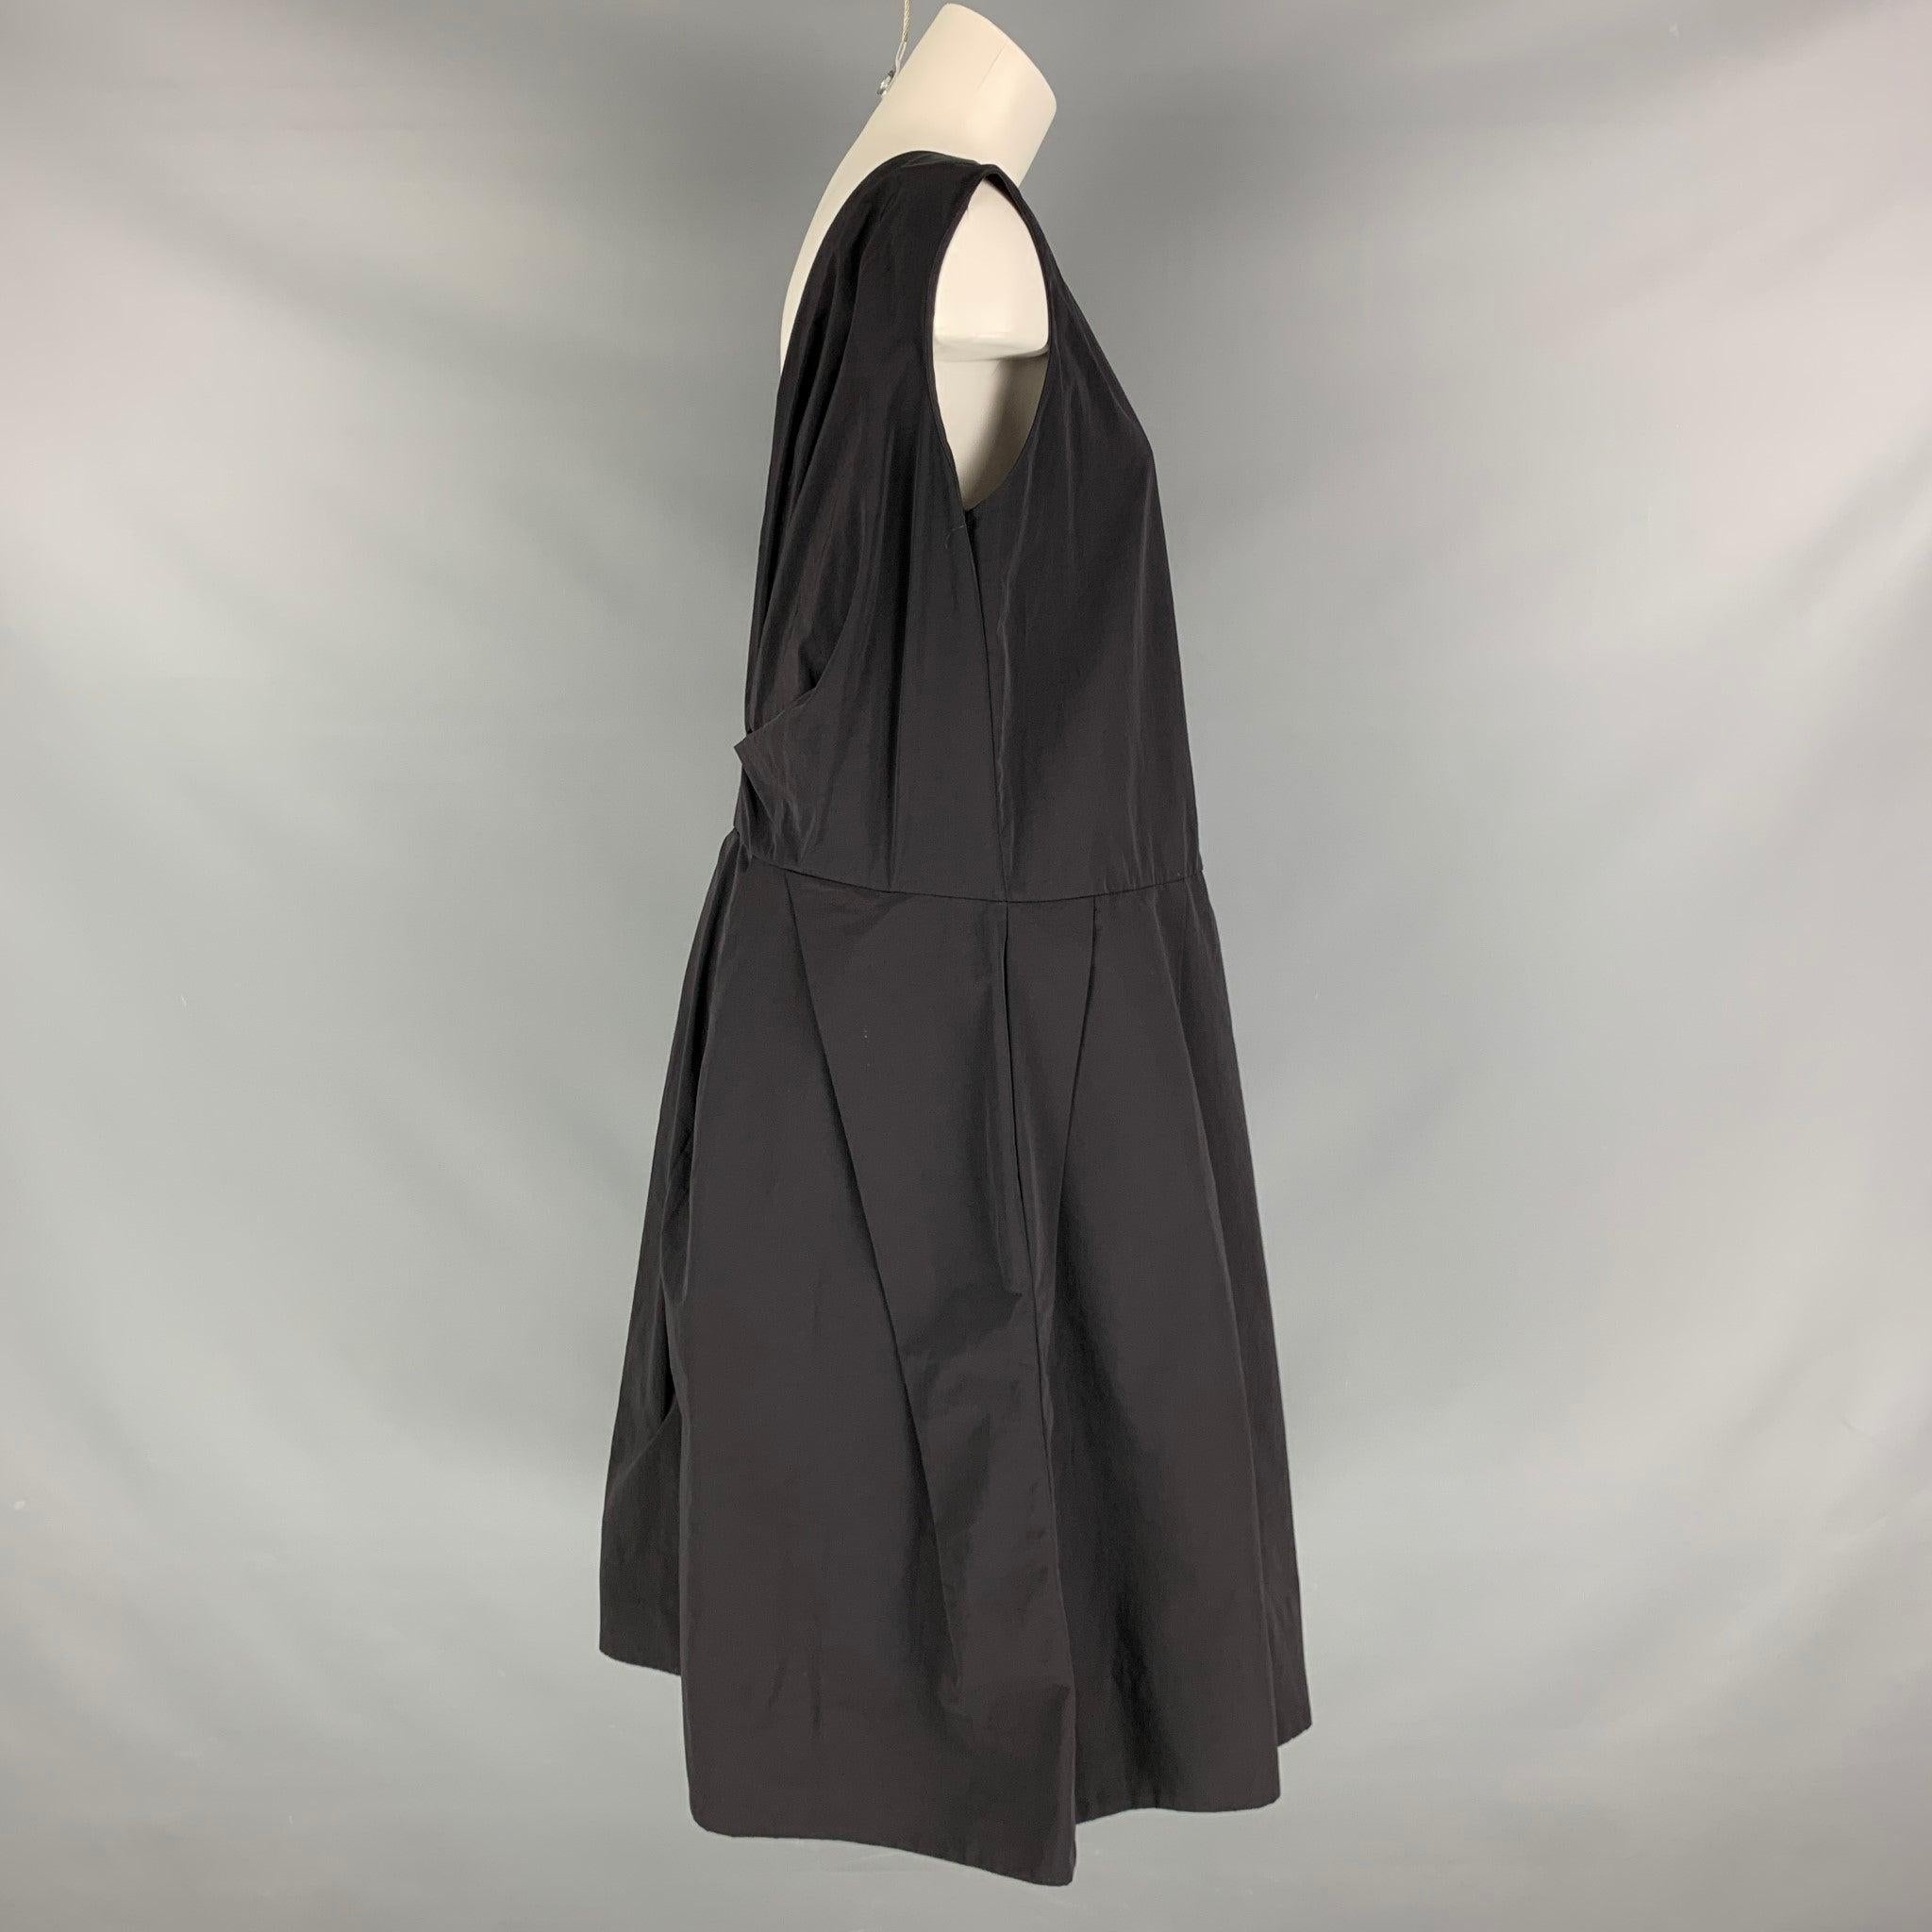 MARNI dress comes in a black cotton and nylon woven material featuring a back drop V design, oversized style, pockets, and sleeveless. Made in Italy.Excellent Pre-Owned Condition. 

Marked:  42 

Measurements: 
 
Shoulder: 16 inches Bust: 40 inches